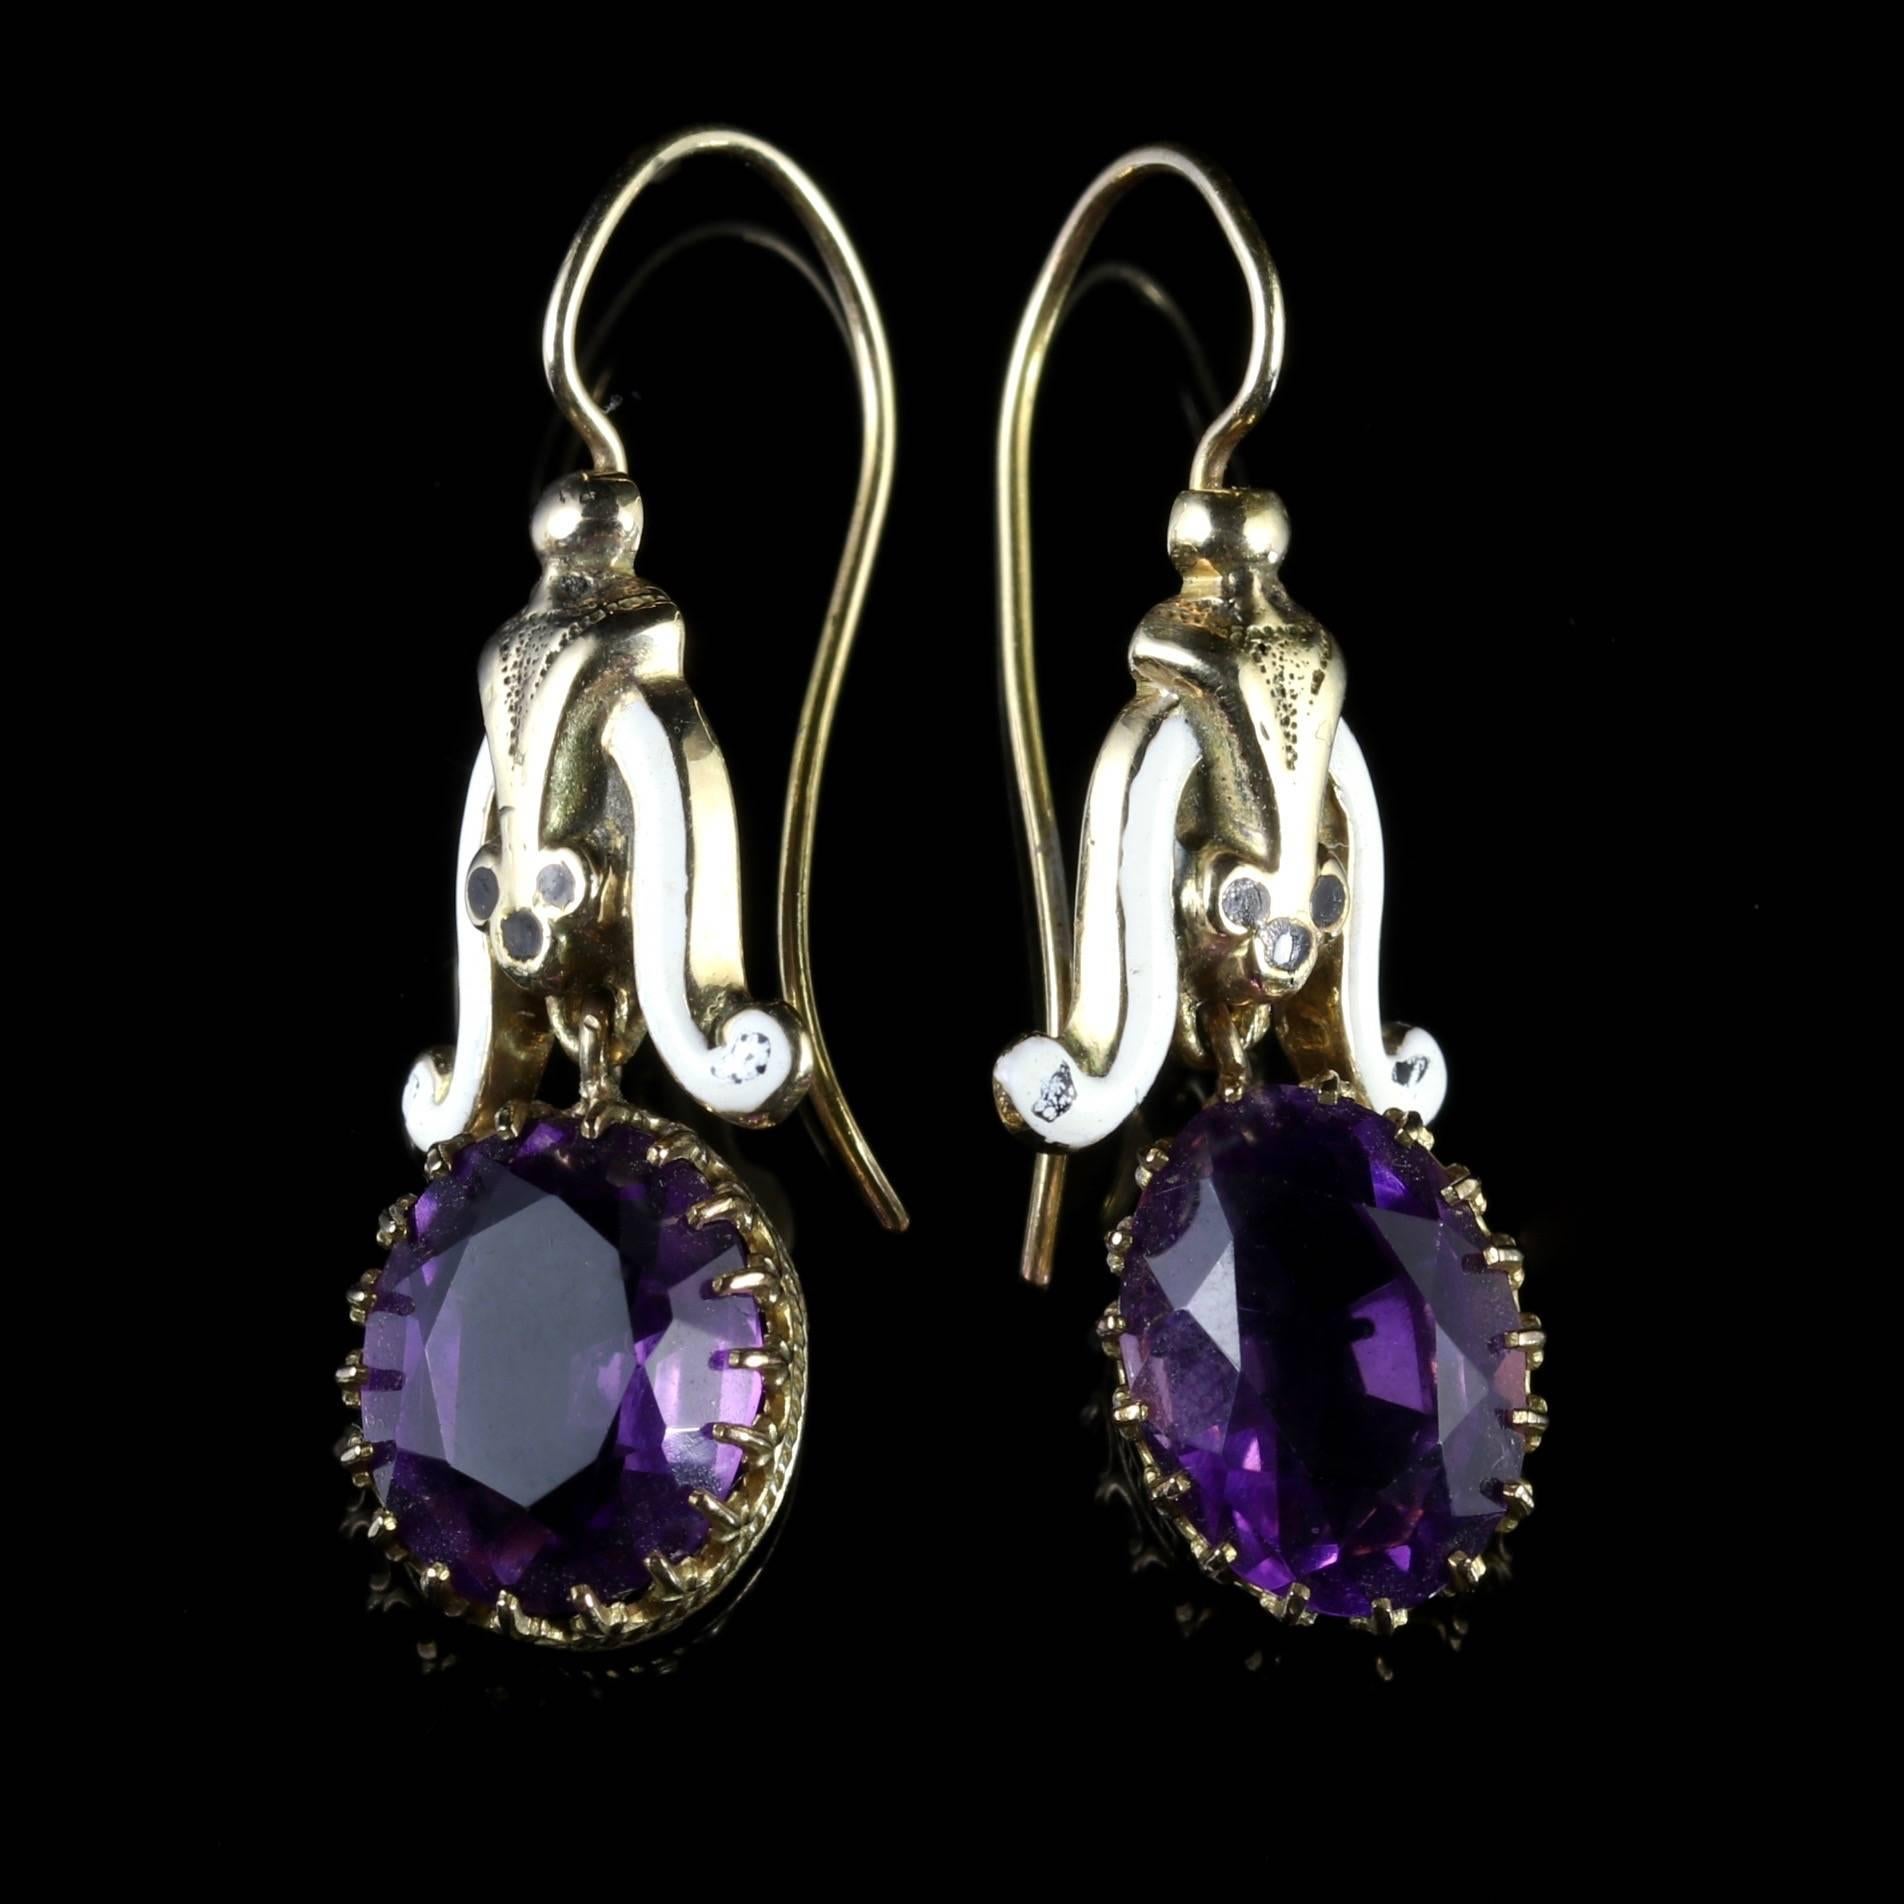 These fabulous 18ct Yellow Gold earrings are set with Amethyst stones which are 3ct plus each, Circa 1900.

Beautiful enamelling adorns these prestigious earrings.

Amethyst has been highly esteemed throughout the ages for its stunning beauty and